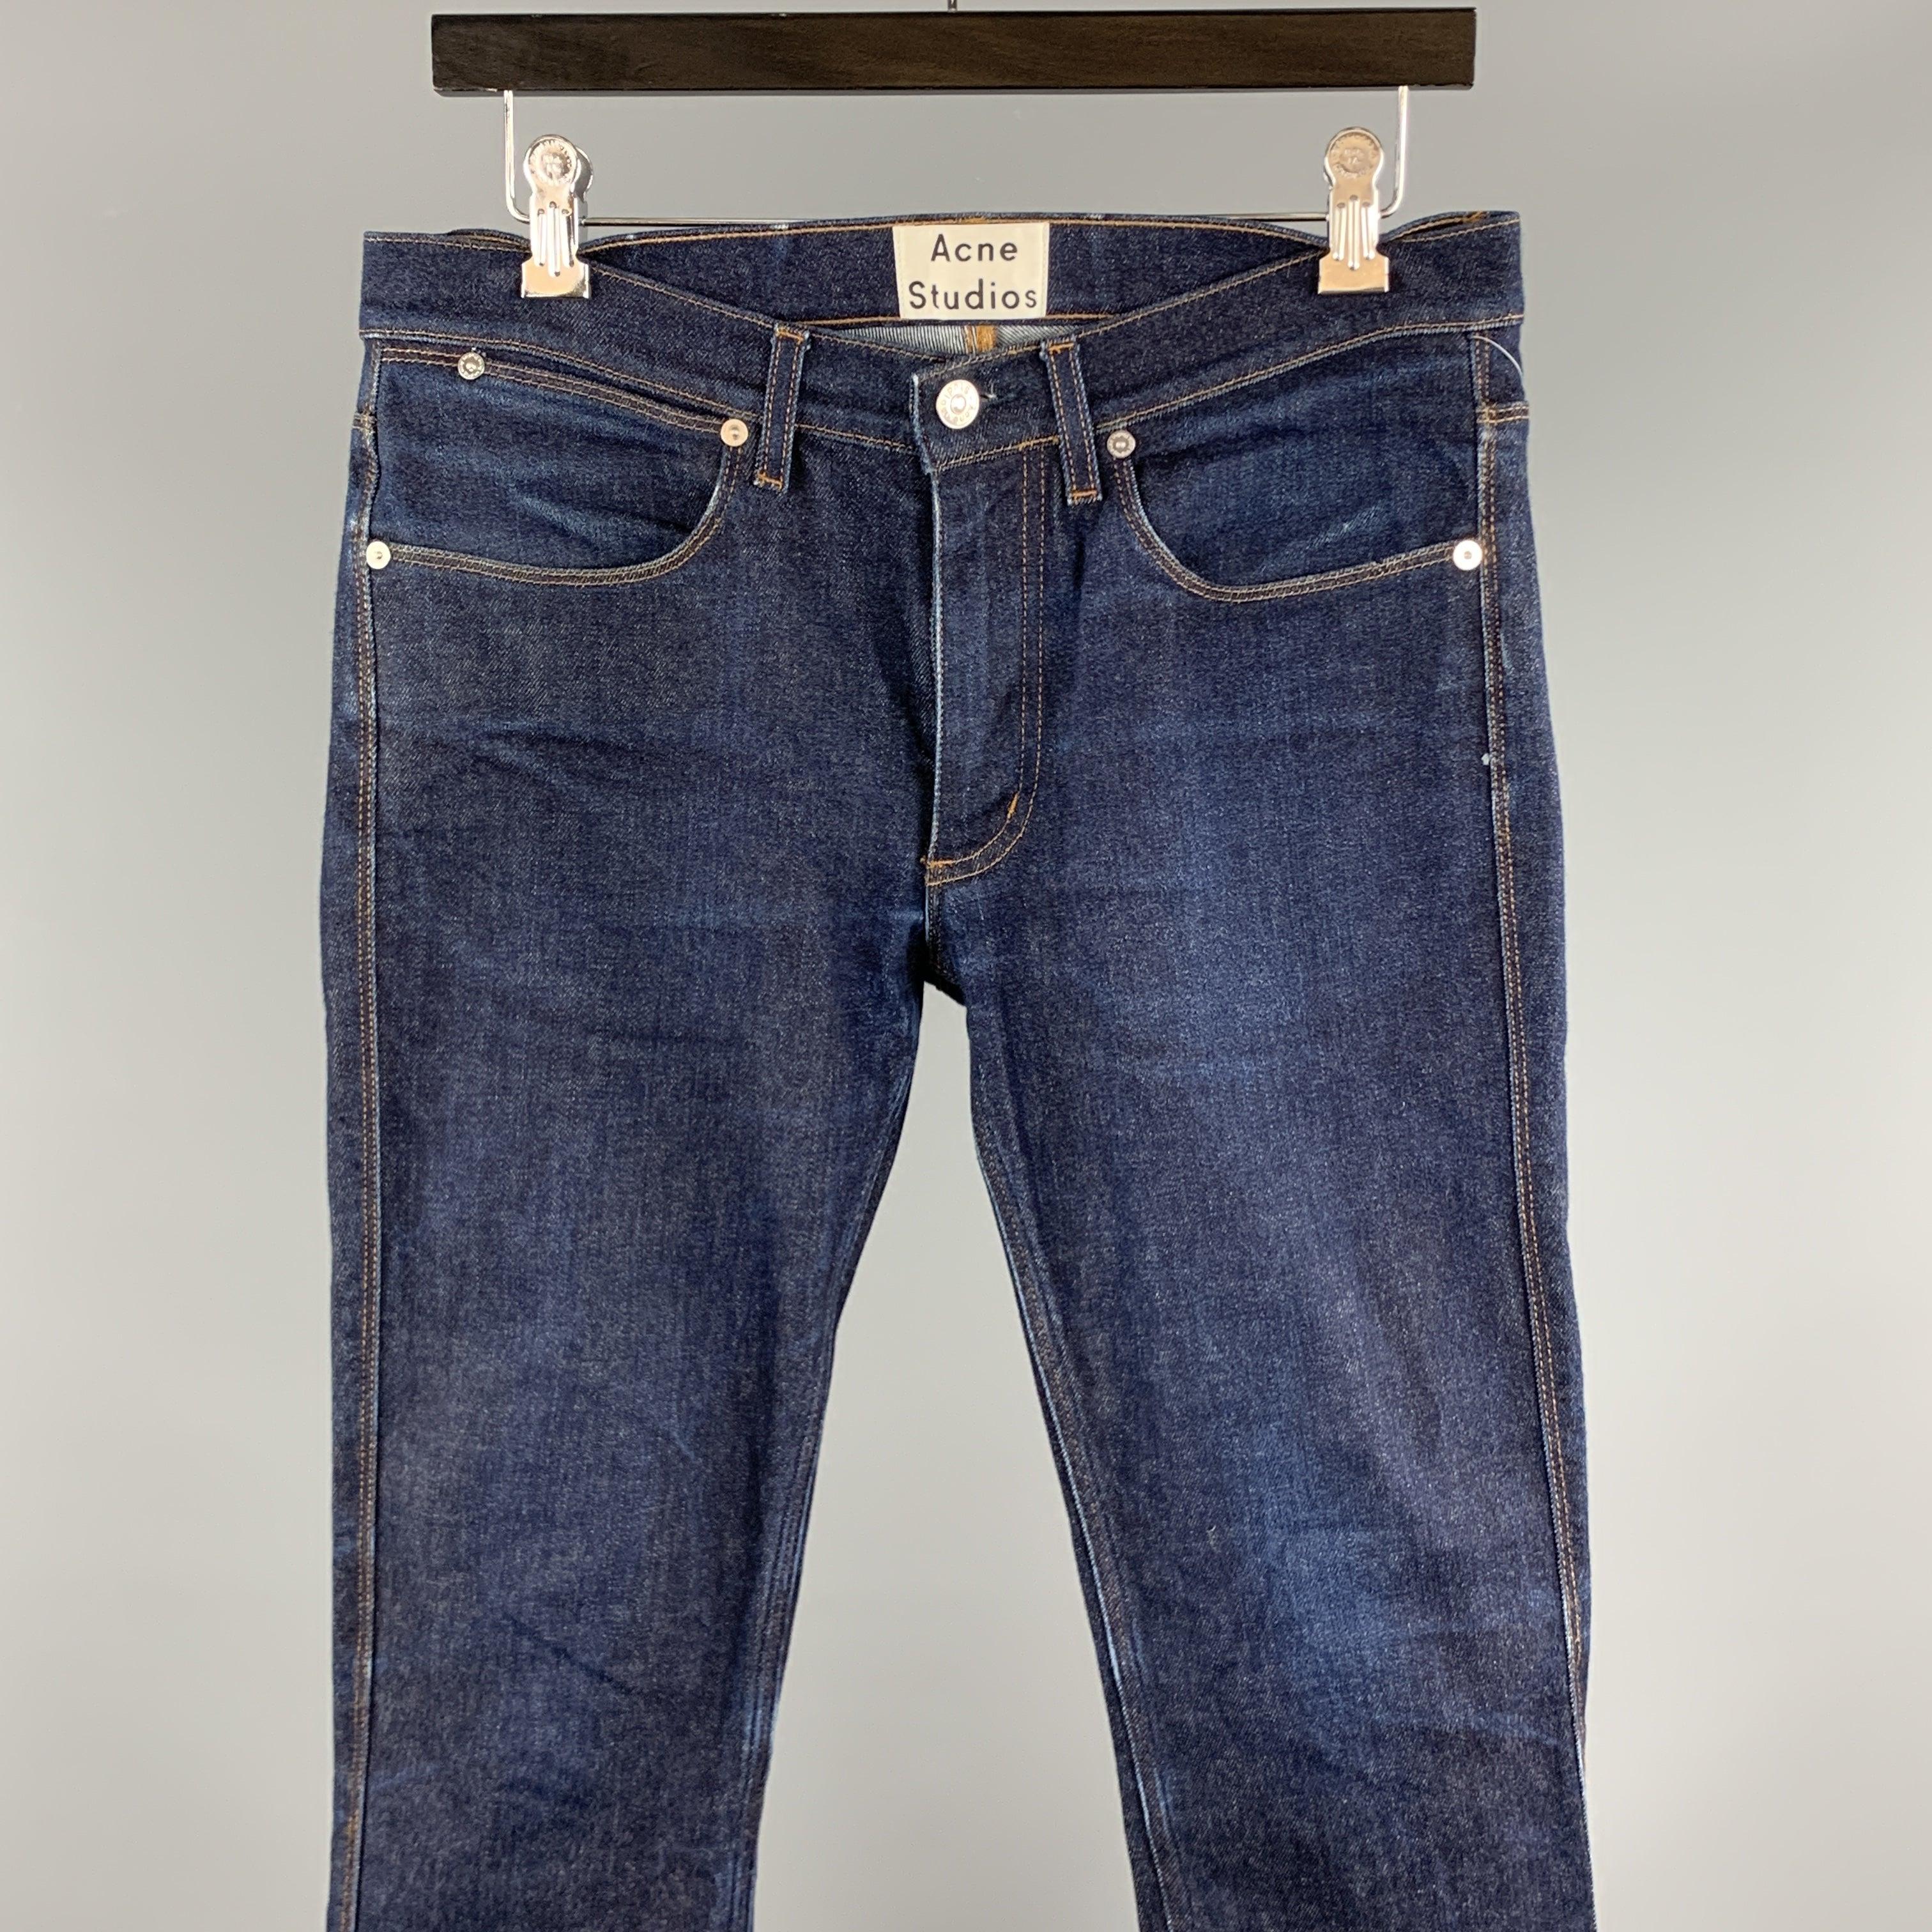 ACNE STUDIOS Jeans comes in a indigo cotton featuring contrast stitching and a zip fly closure. Made in Italy.
 Excellent
 Pre-Owned Condition. 
 

 Marked:  31 x 32 
 

 Measurements: 
  Waist: 31 inches 
 Rise: 8 inches 
 Inseam: 32 inches 
  
  
